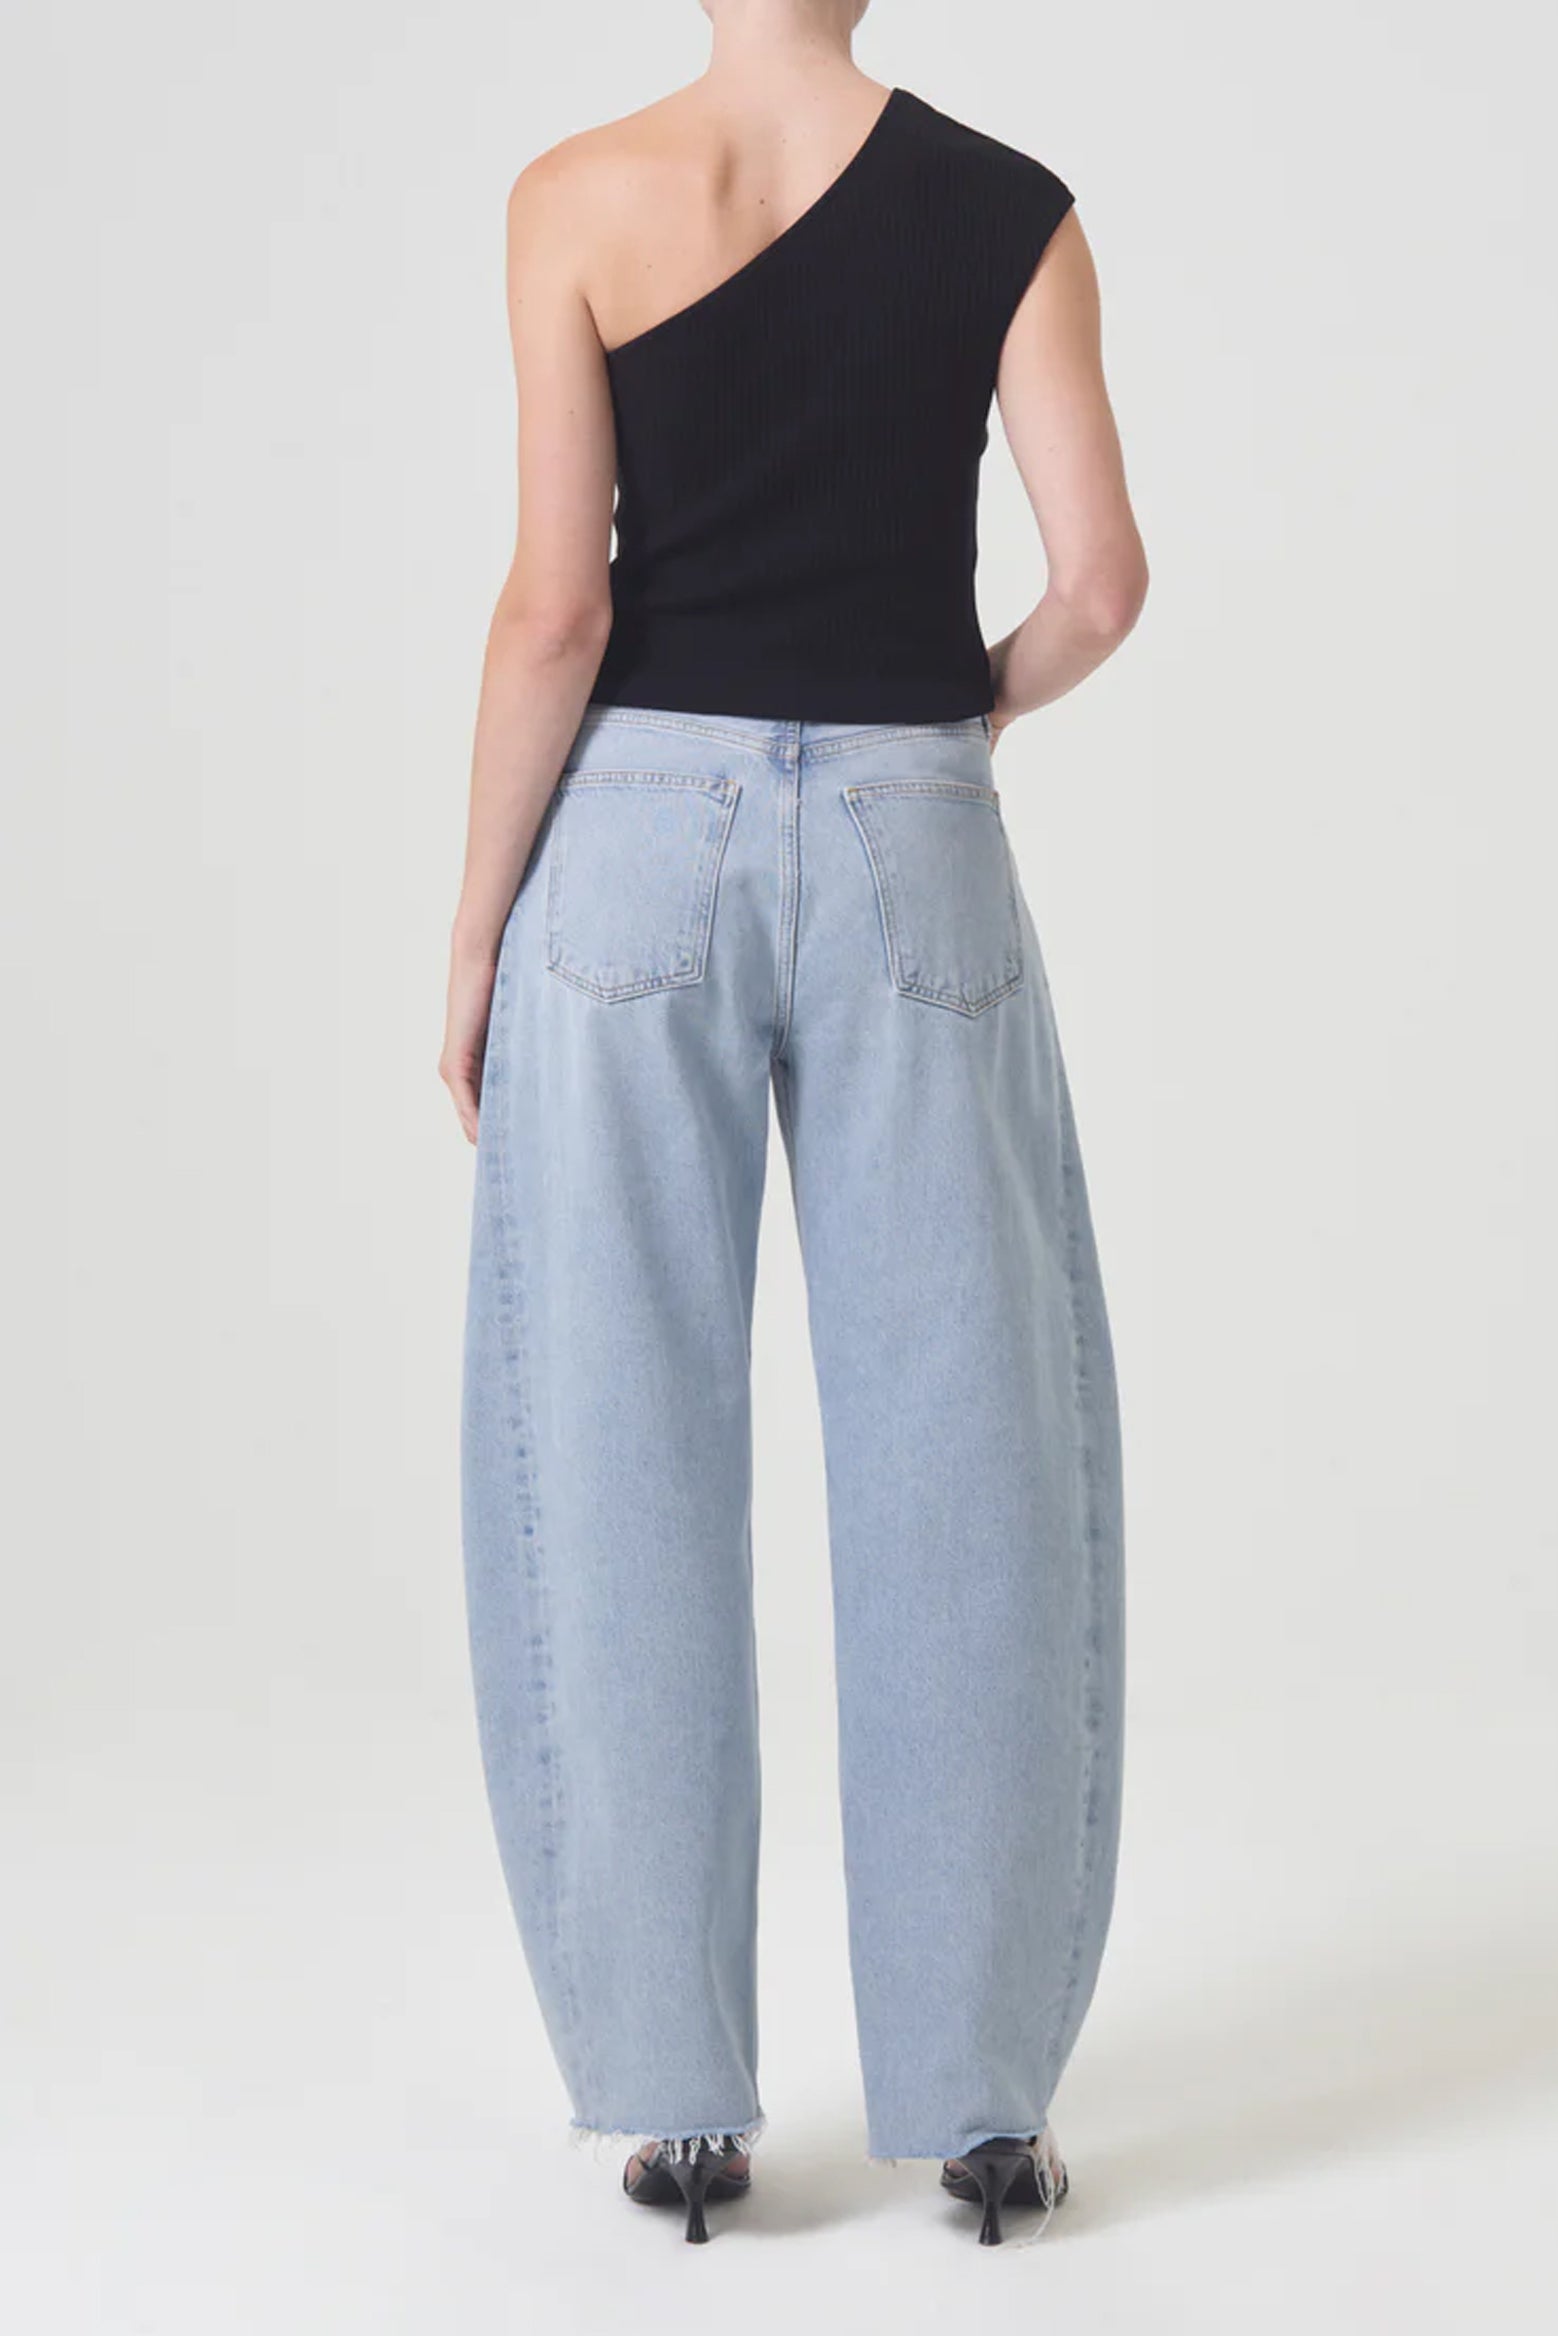 Agolde High Rise Pieced Jean in Void available at The New Trend Australia.